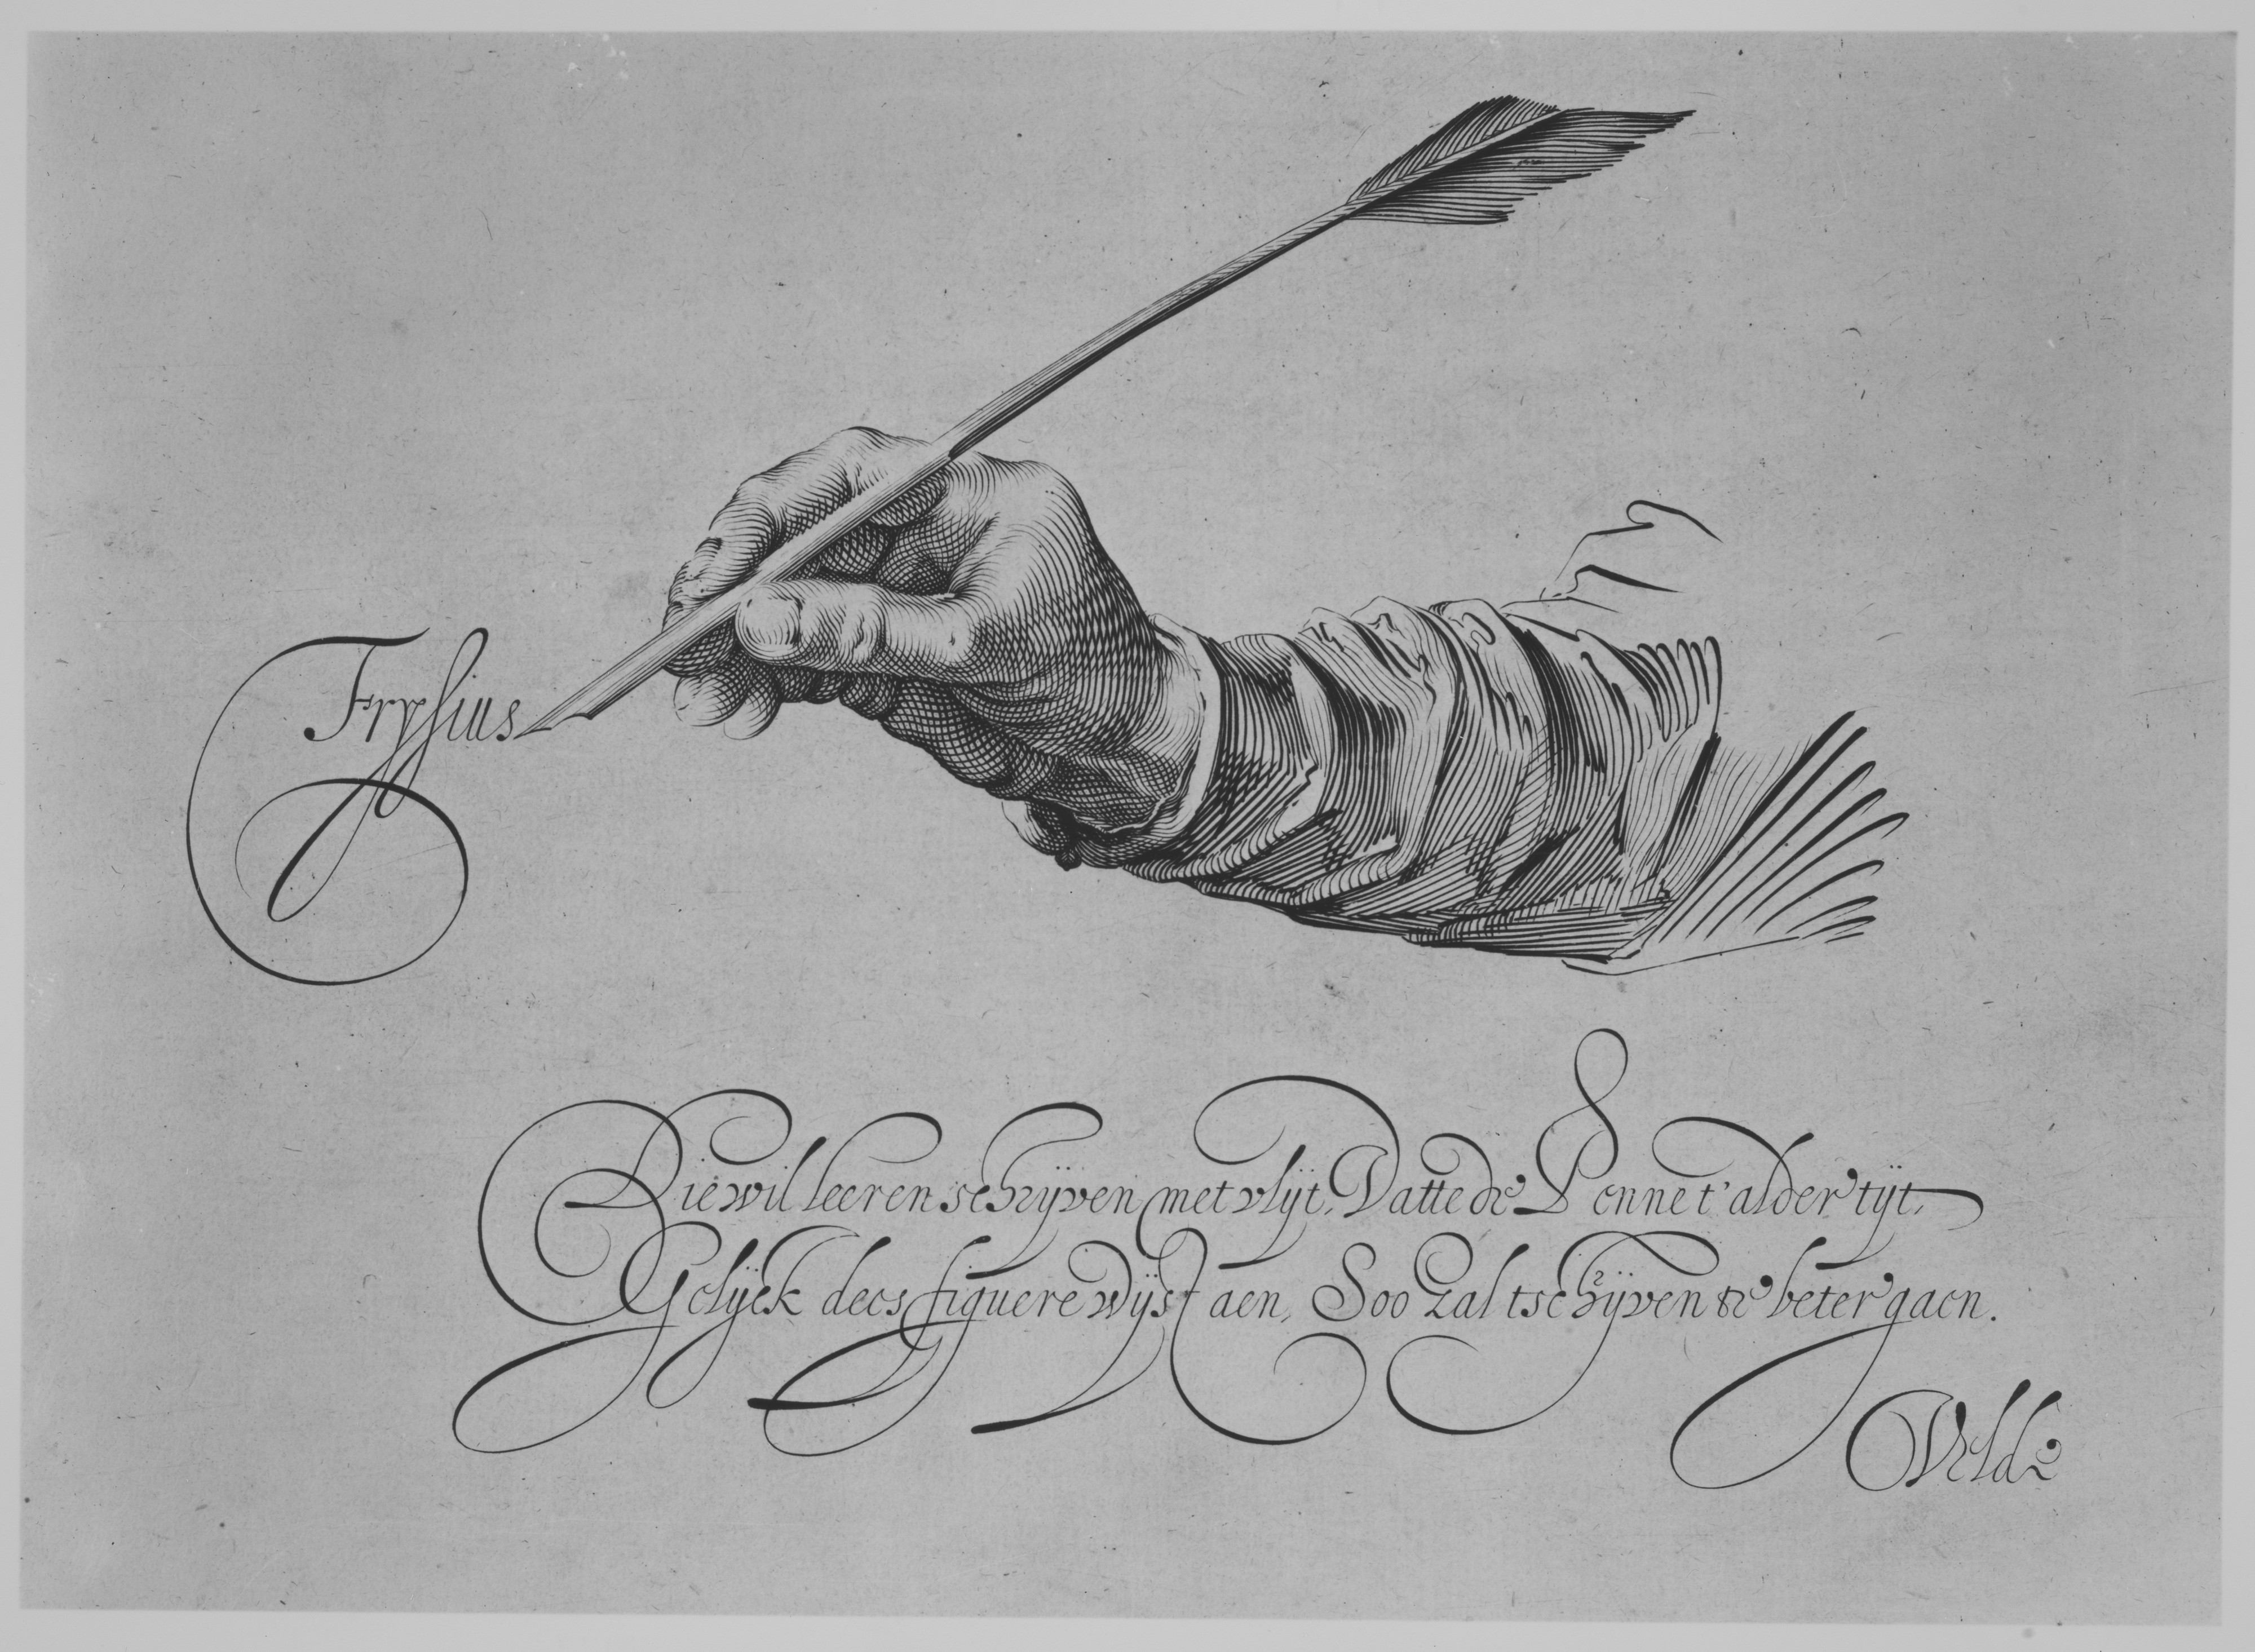 a hand and arm with quill pen doing fanciful cursive writing - Copy is an art